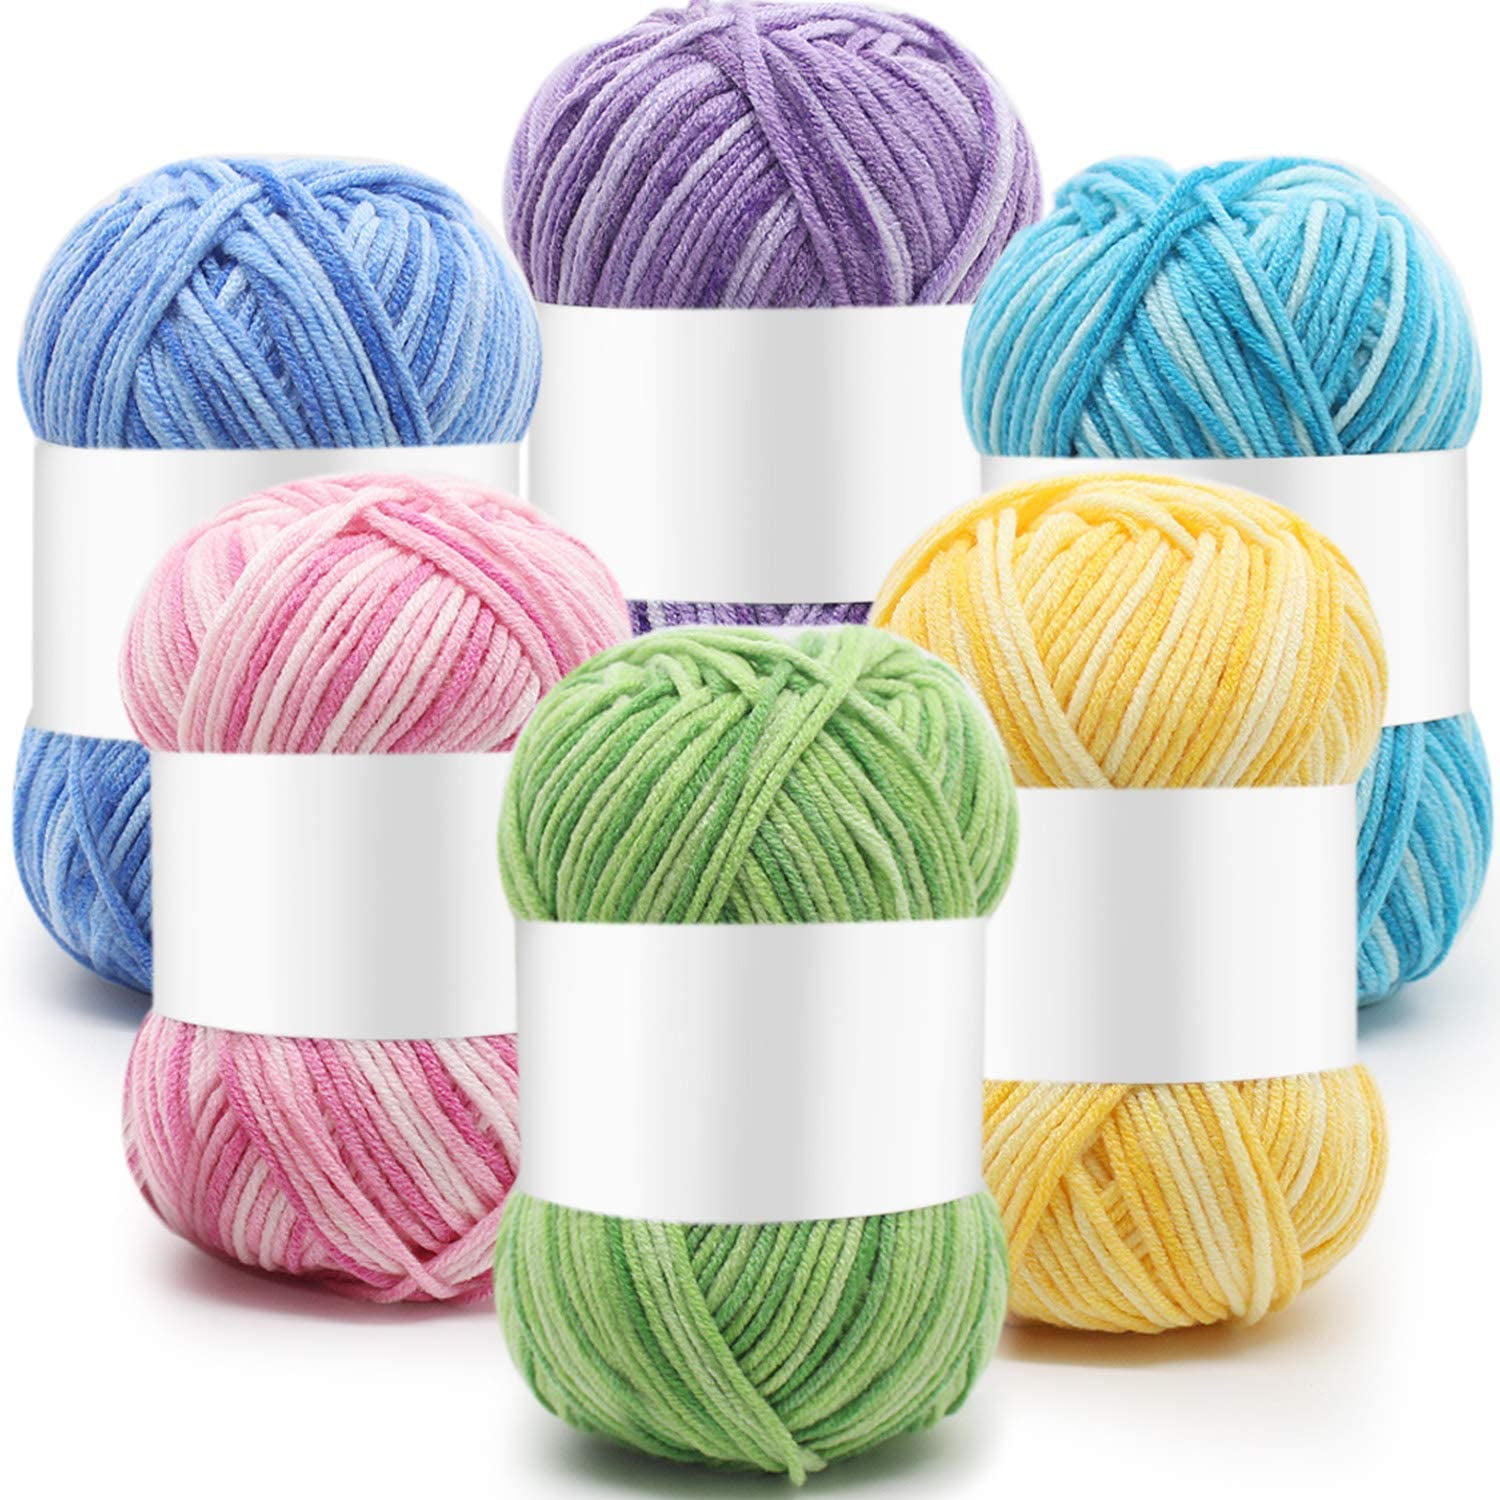 WOOL YARN Assorted Color Mix 18 Balls Free Shipping Fall Colors Collection  